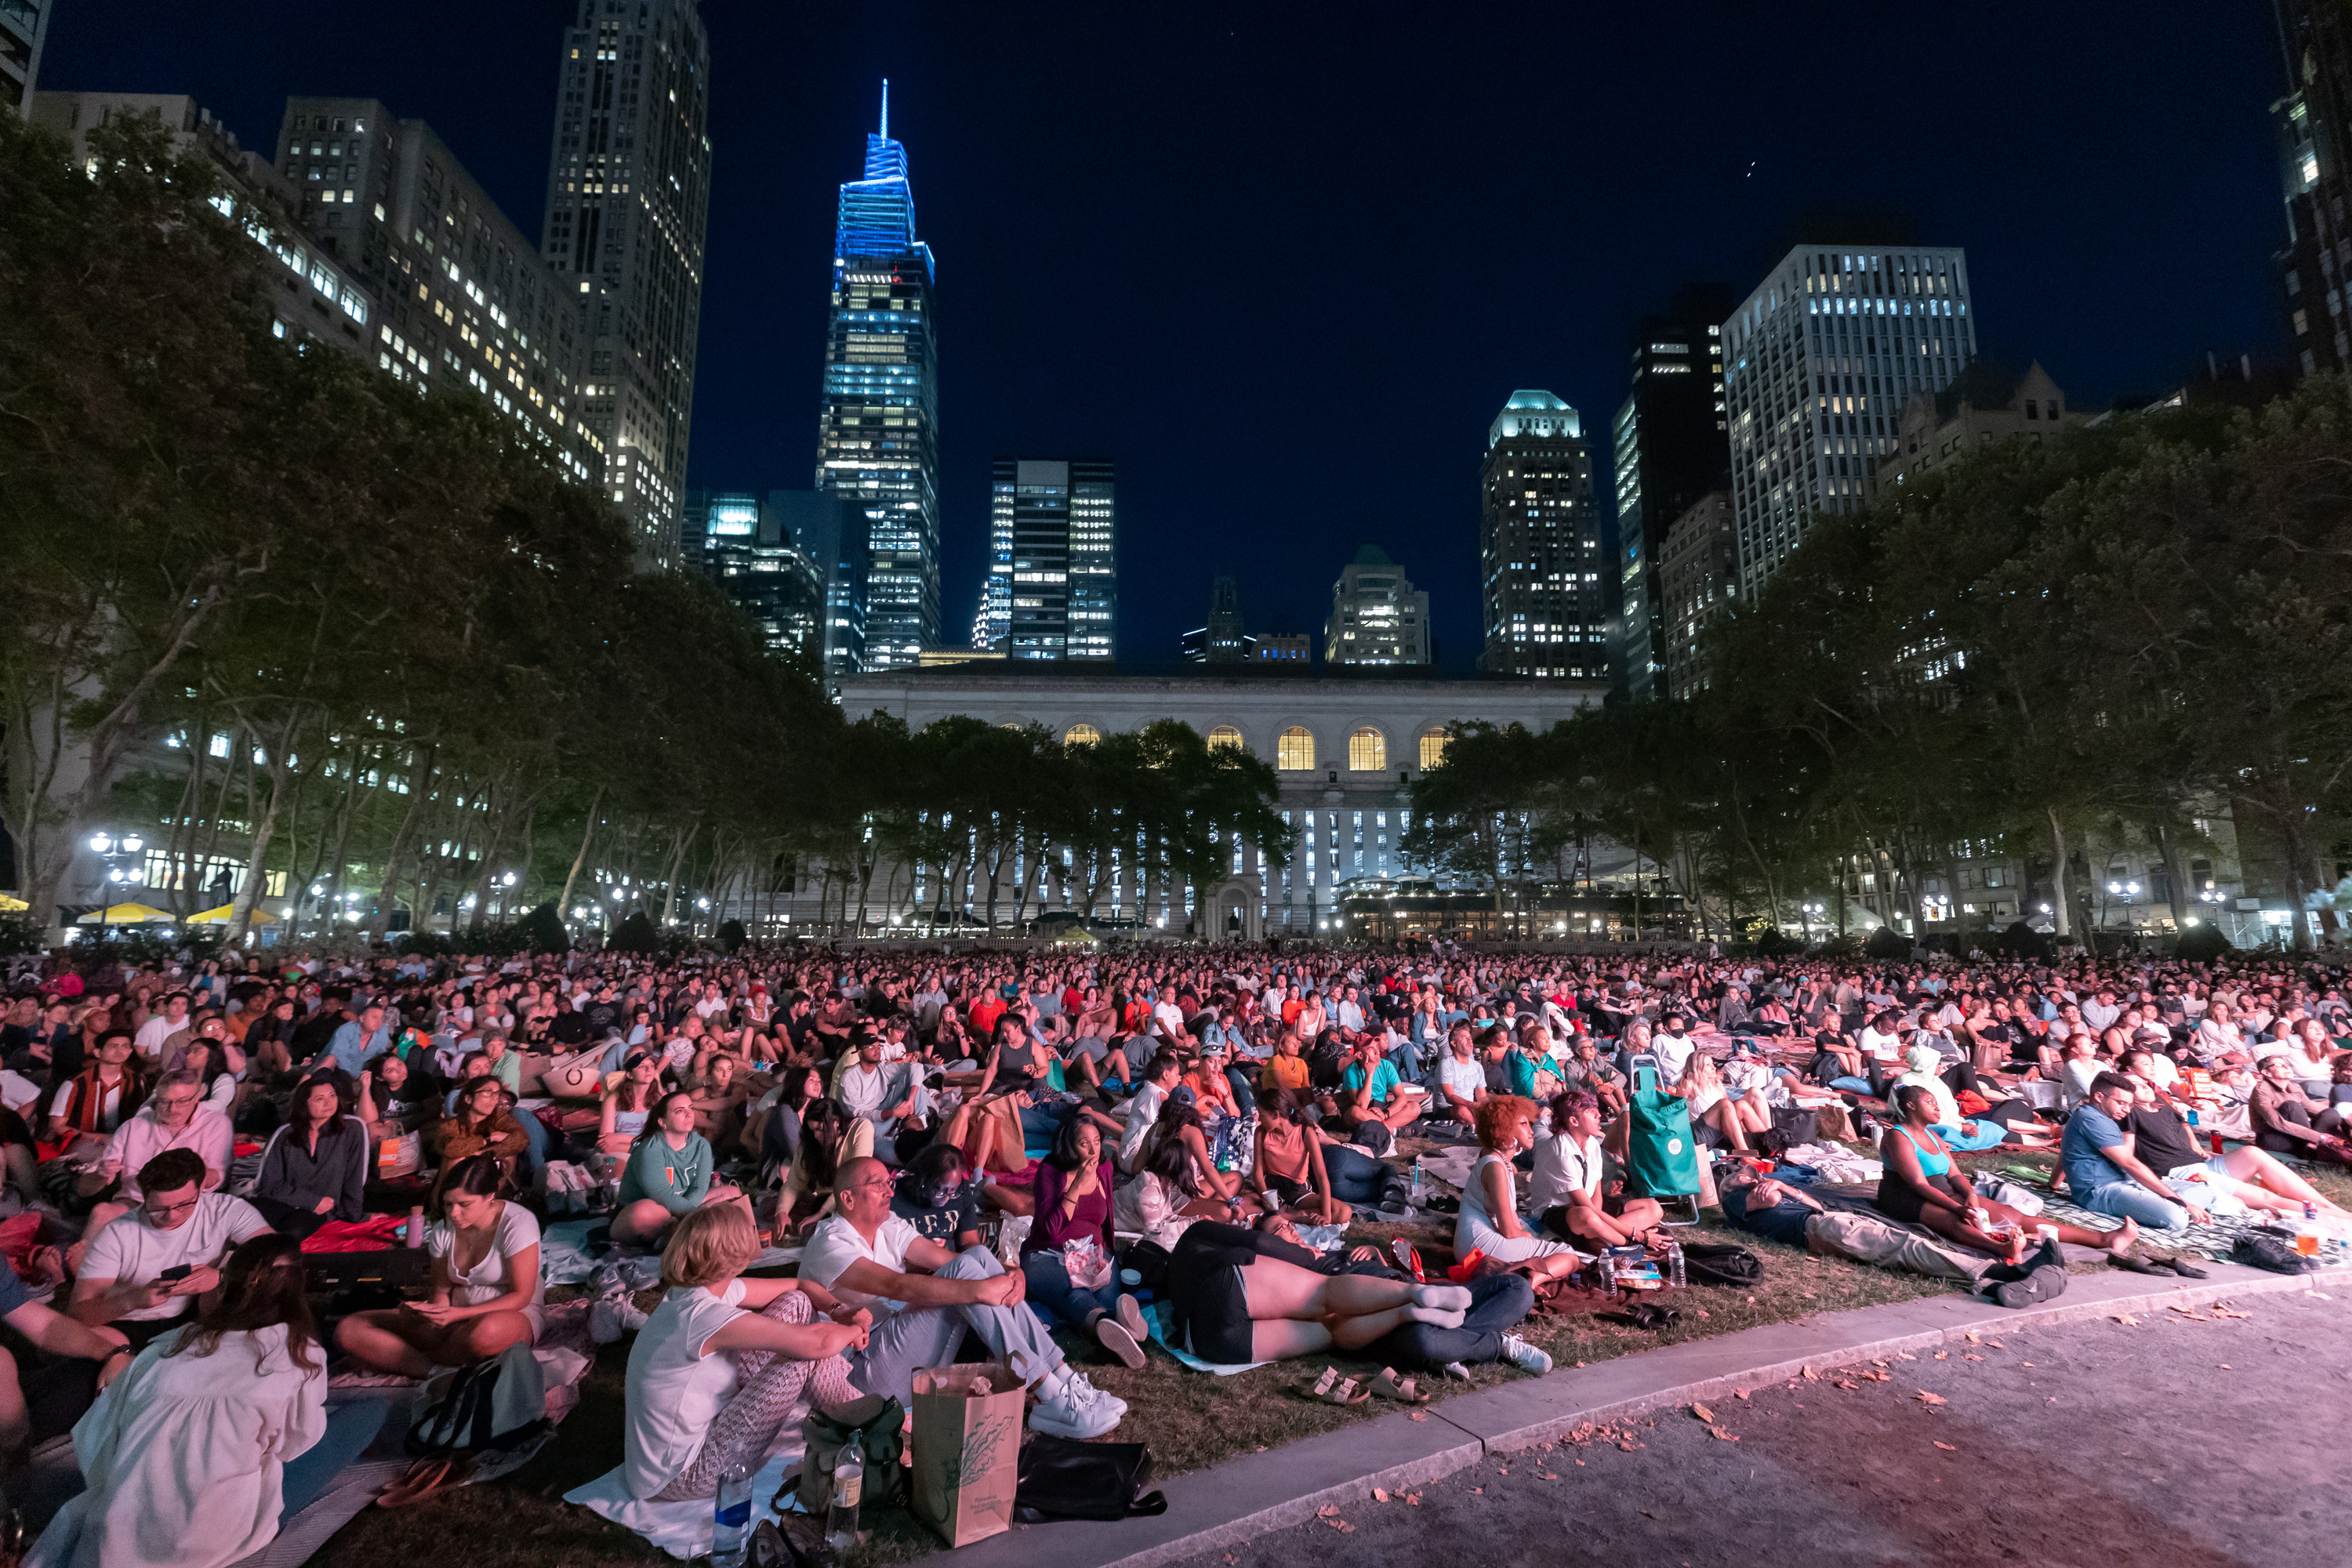 Here’s the lineup for the free movie nights at Bryant Park this summer